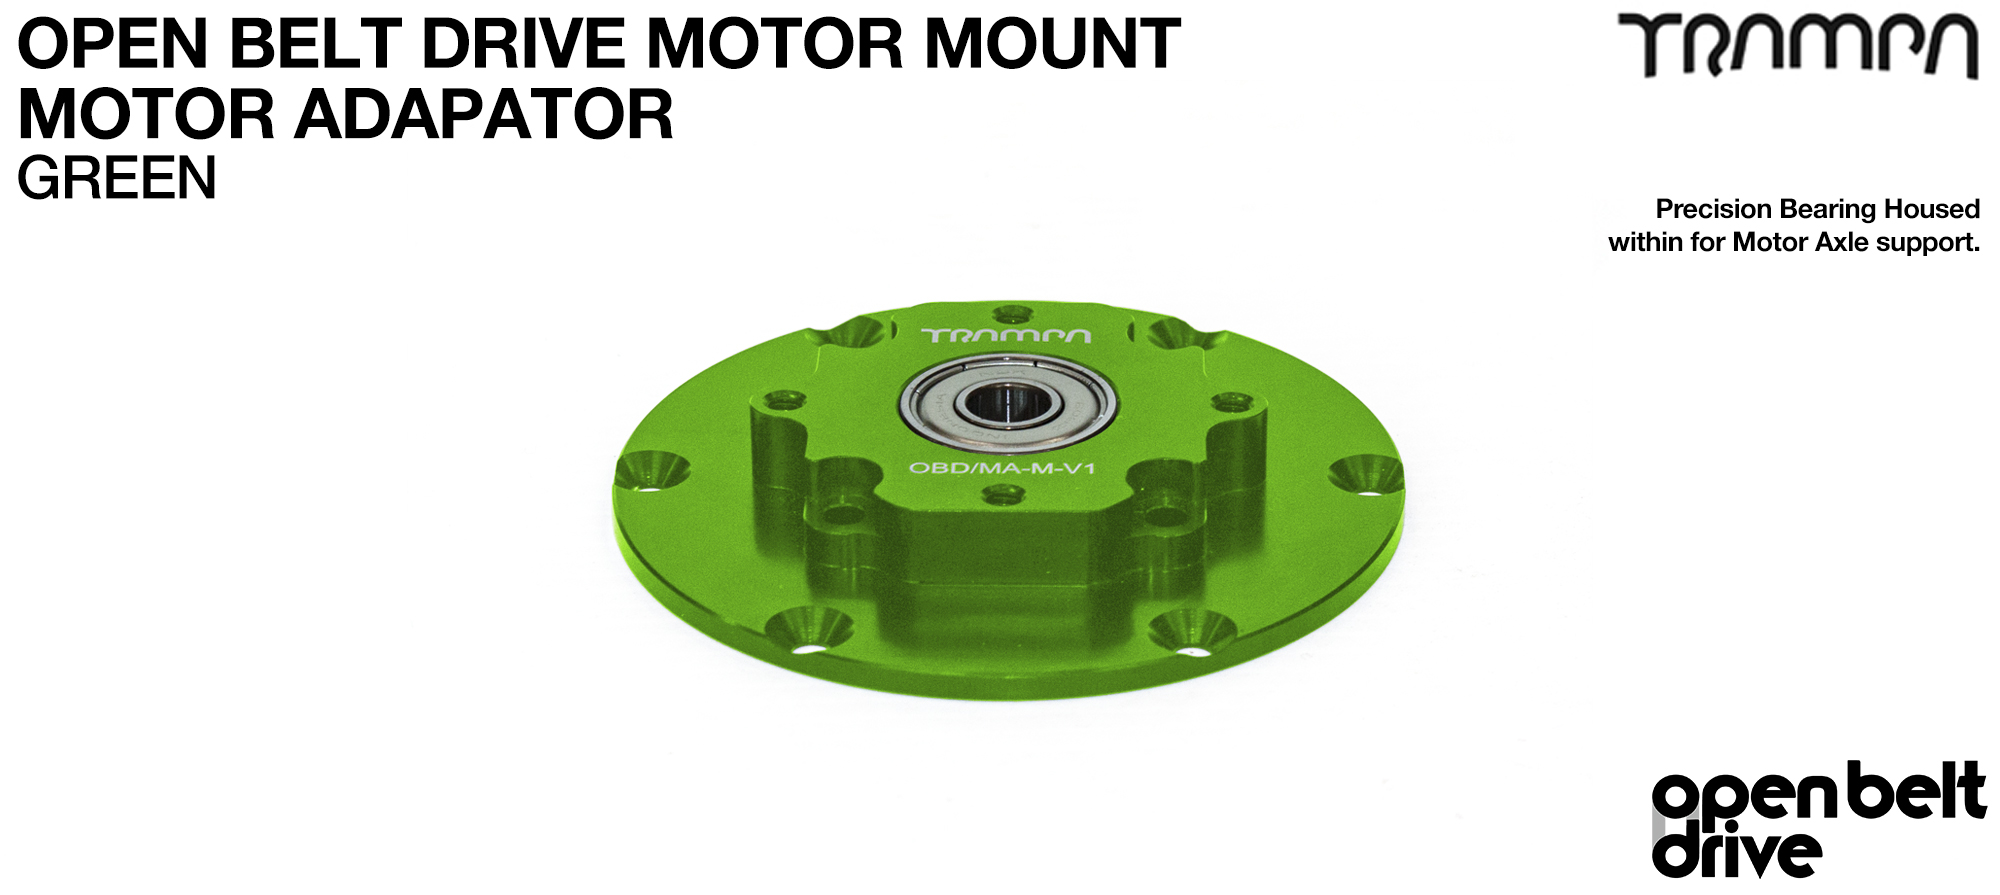 OBD Motor Adaptor with Housed Bearing - GREEN 